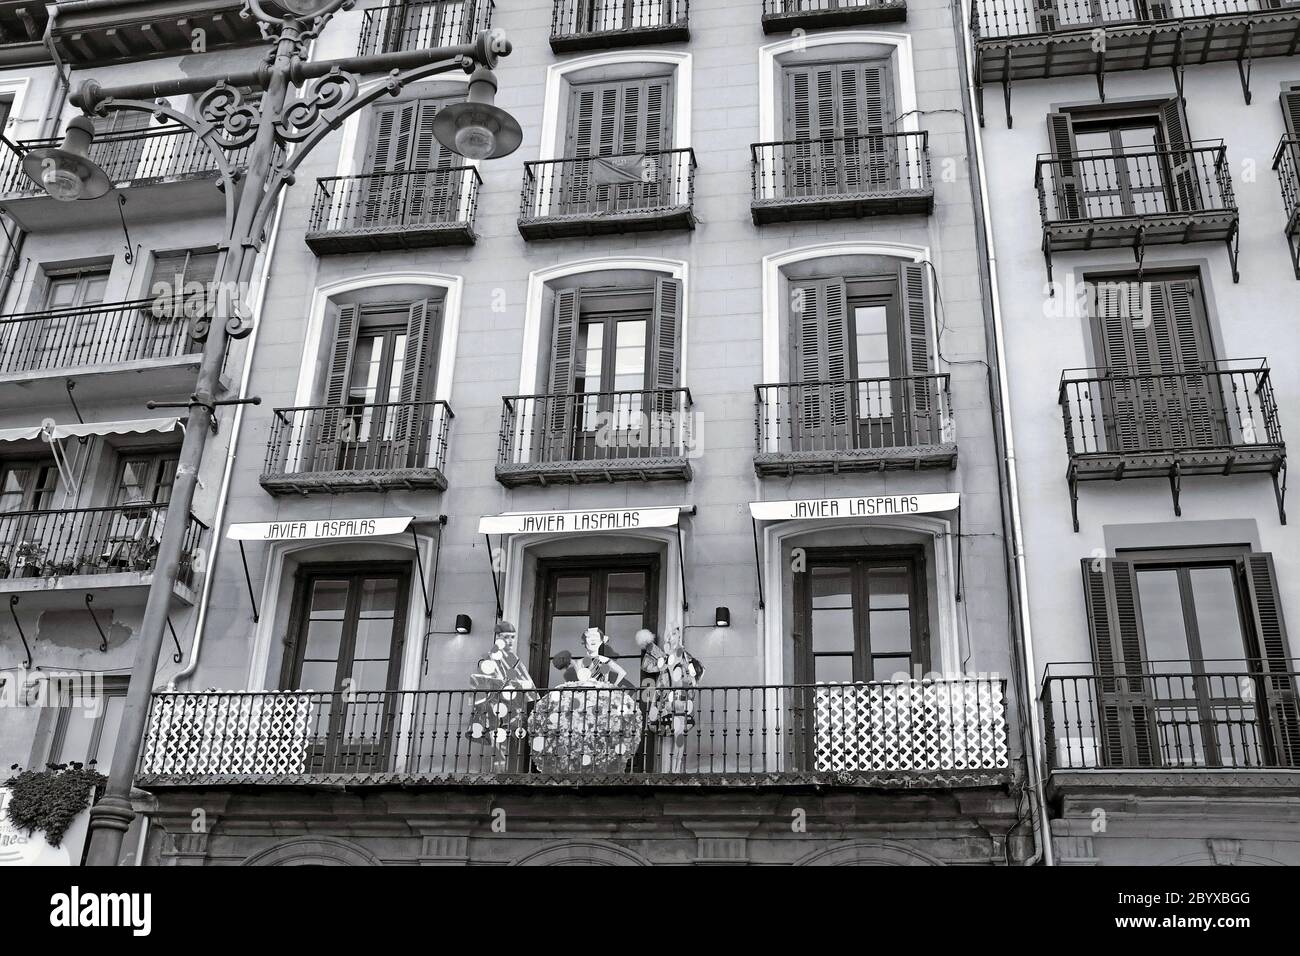 A historic multi-story residential building with terraces and wooden doors in the historic old town area of Pamplona, Spain. Stock Photo